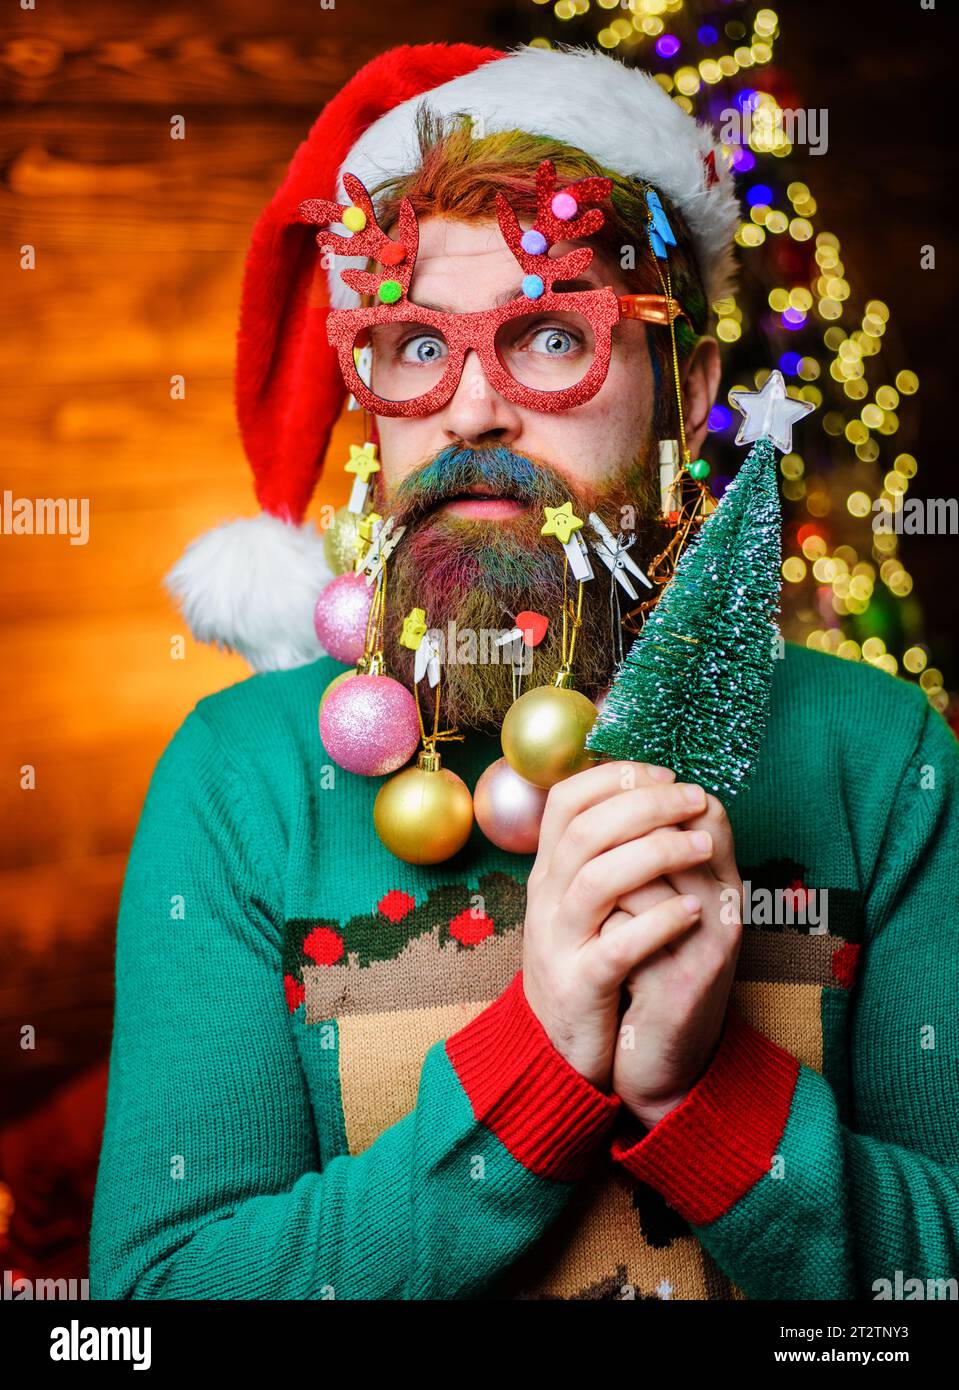 Merry Christmas. Happy New year. Bearded man in Santa hat and party glasses with small Christmas tree. Serious man with decorated beard and dyed hair Stock Photo